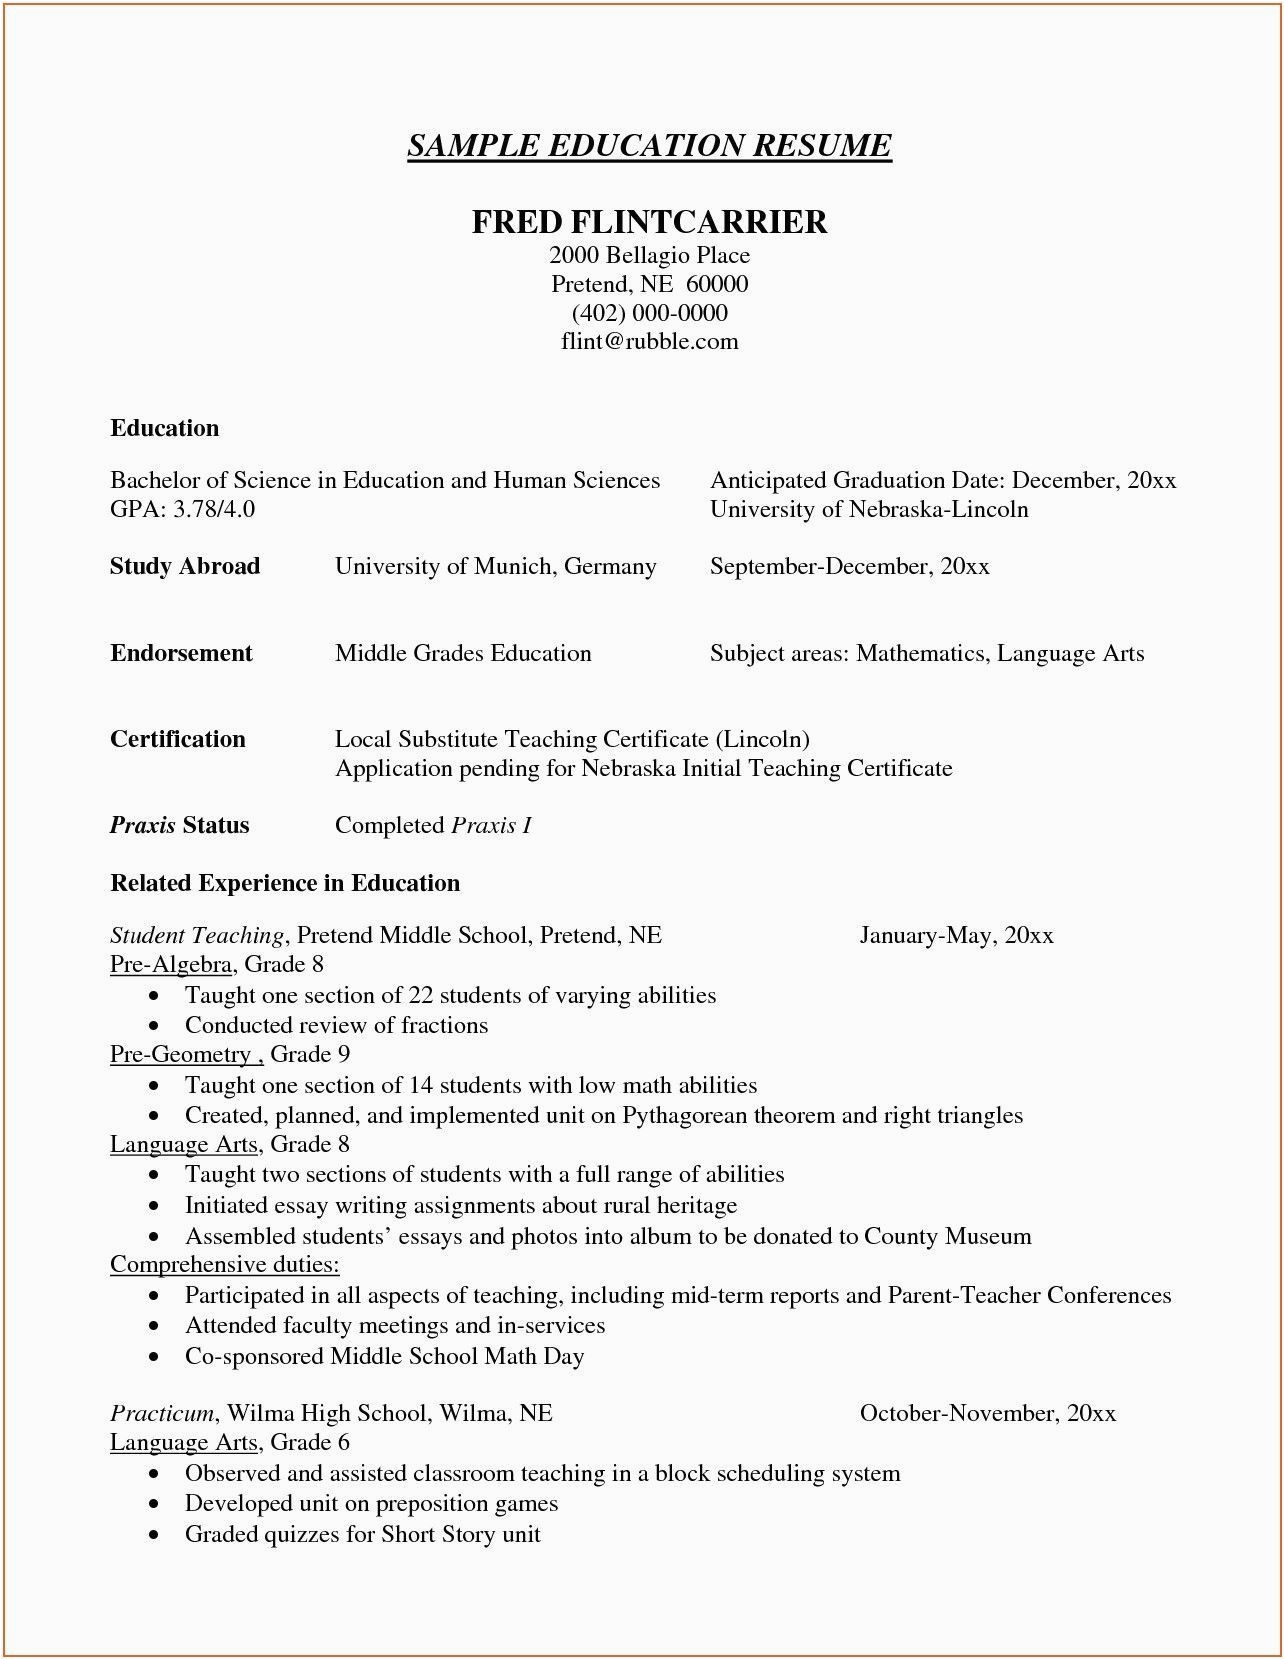 Sample Education Section Of A Resume 31 Resume Sample Education Section that You Should Know